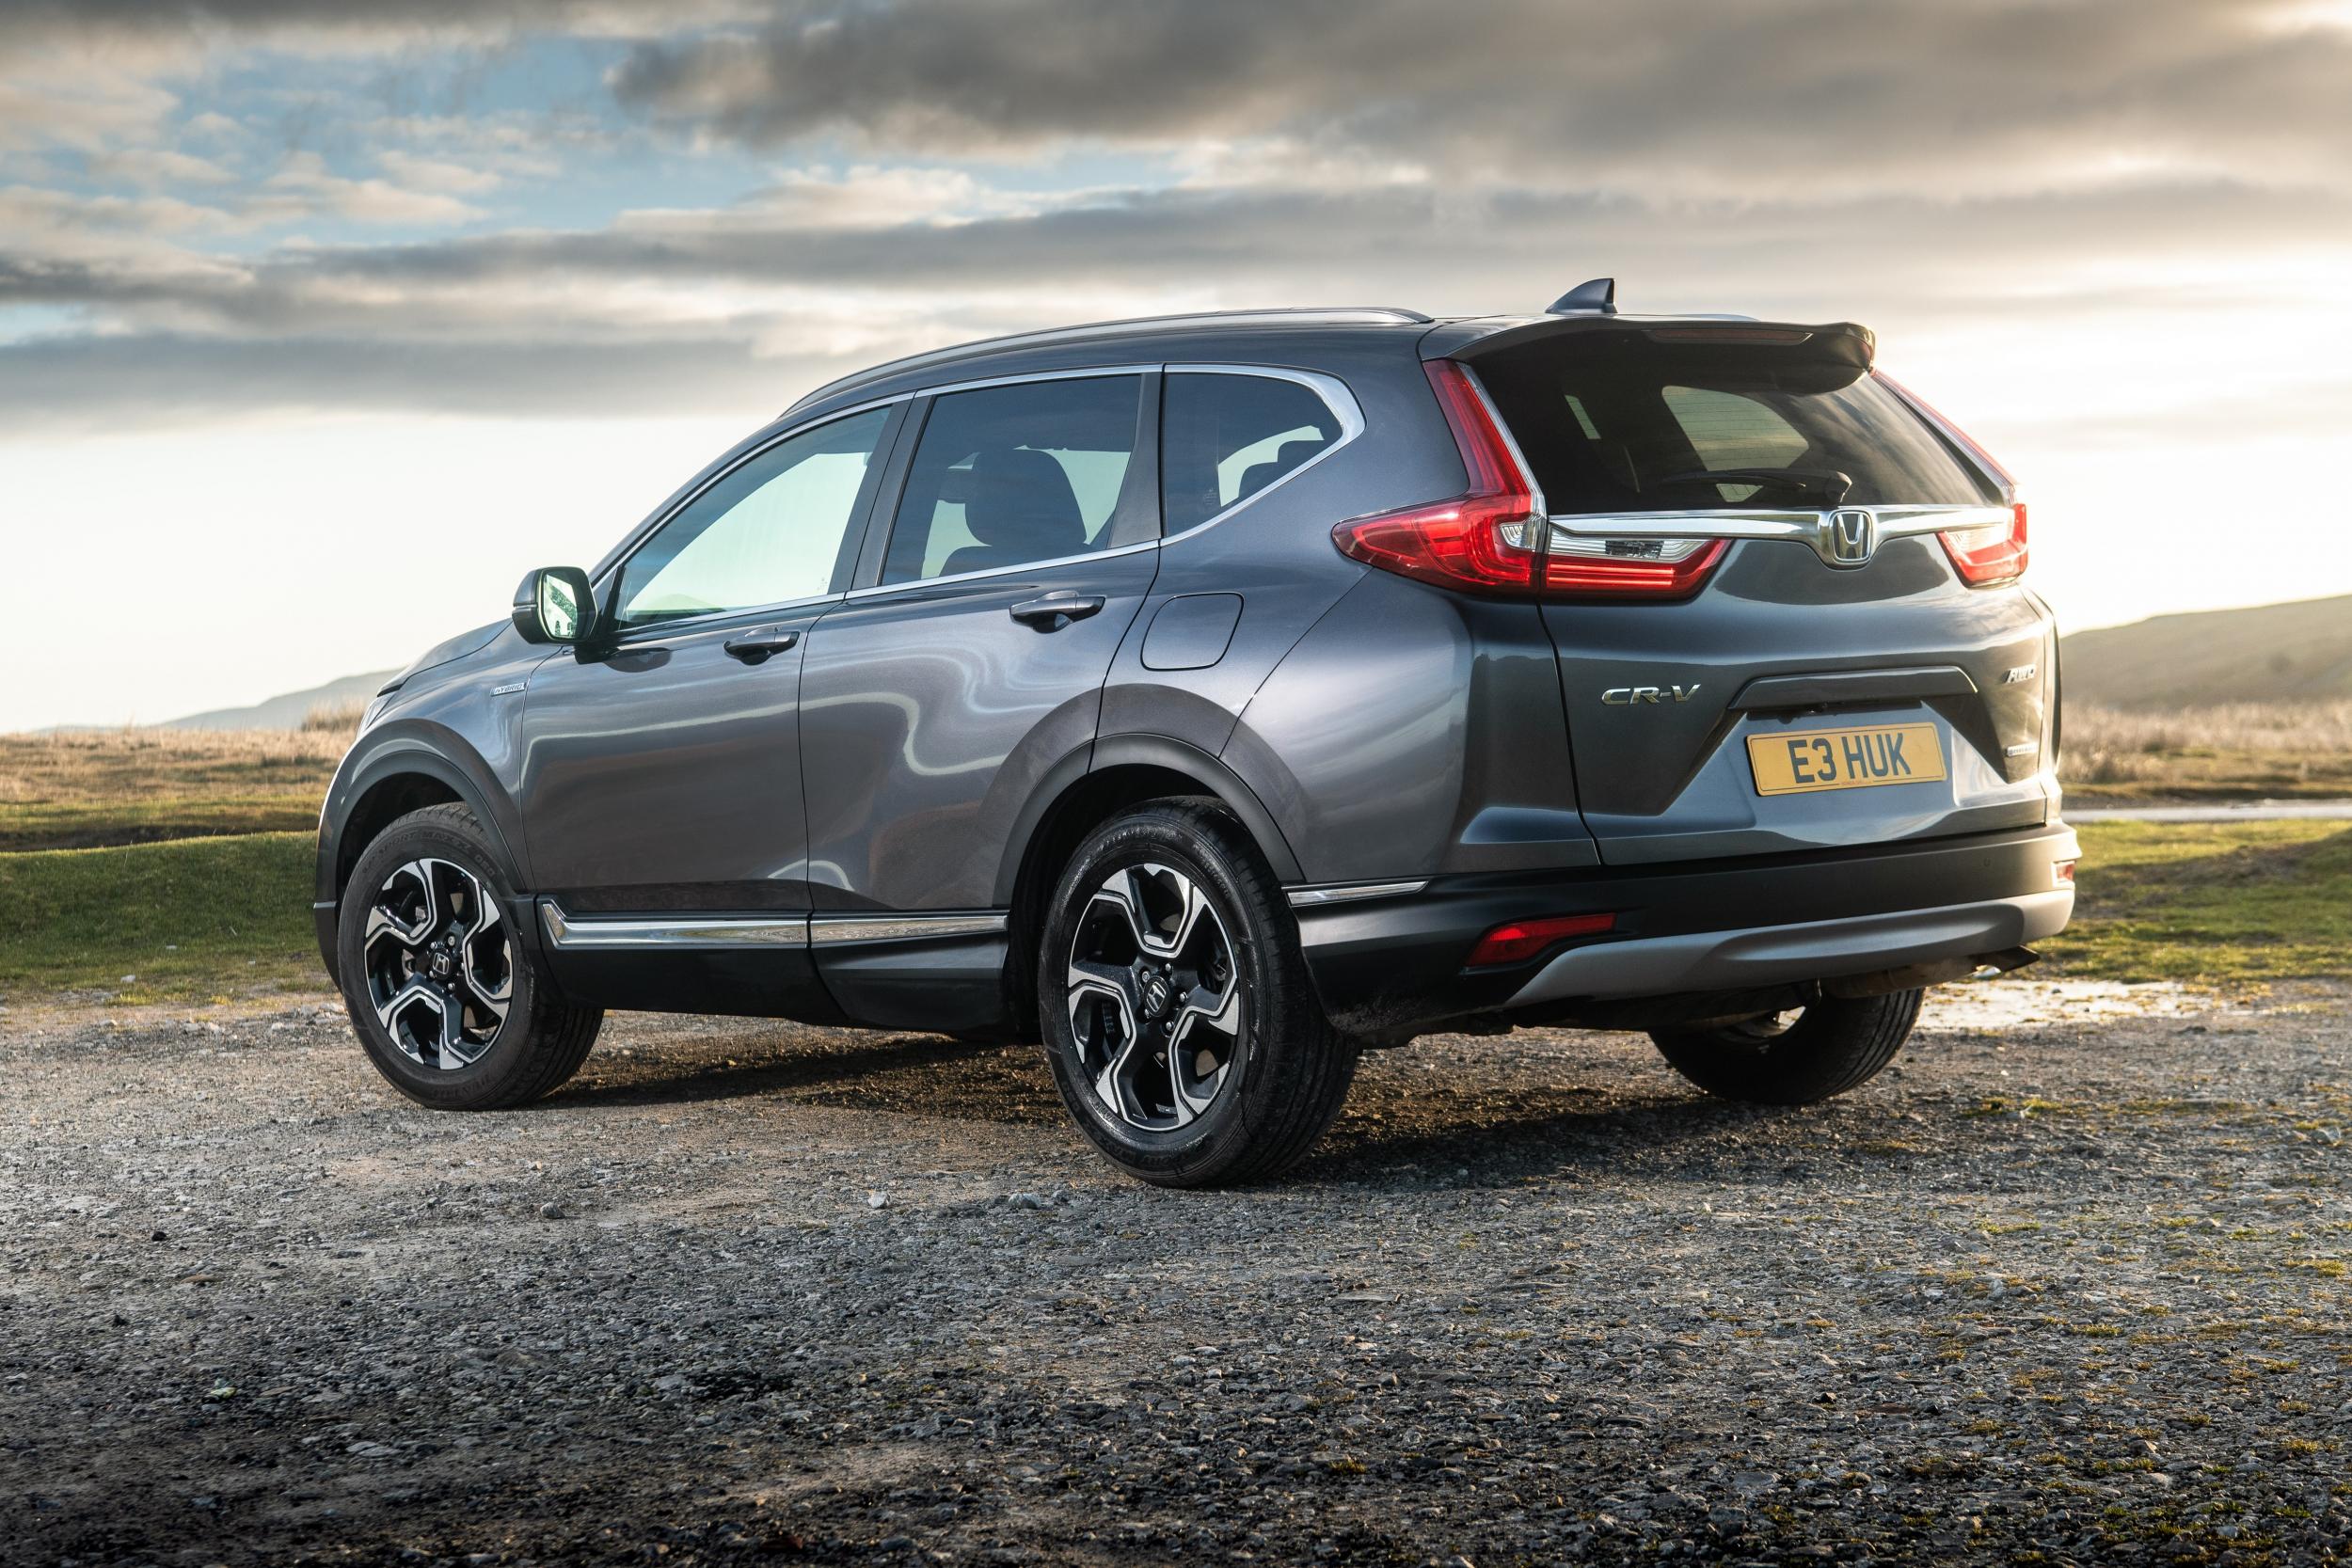 The CR-V stands out from the crowd, albeit for the wrong reasons